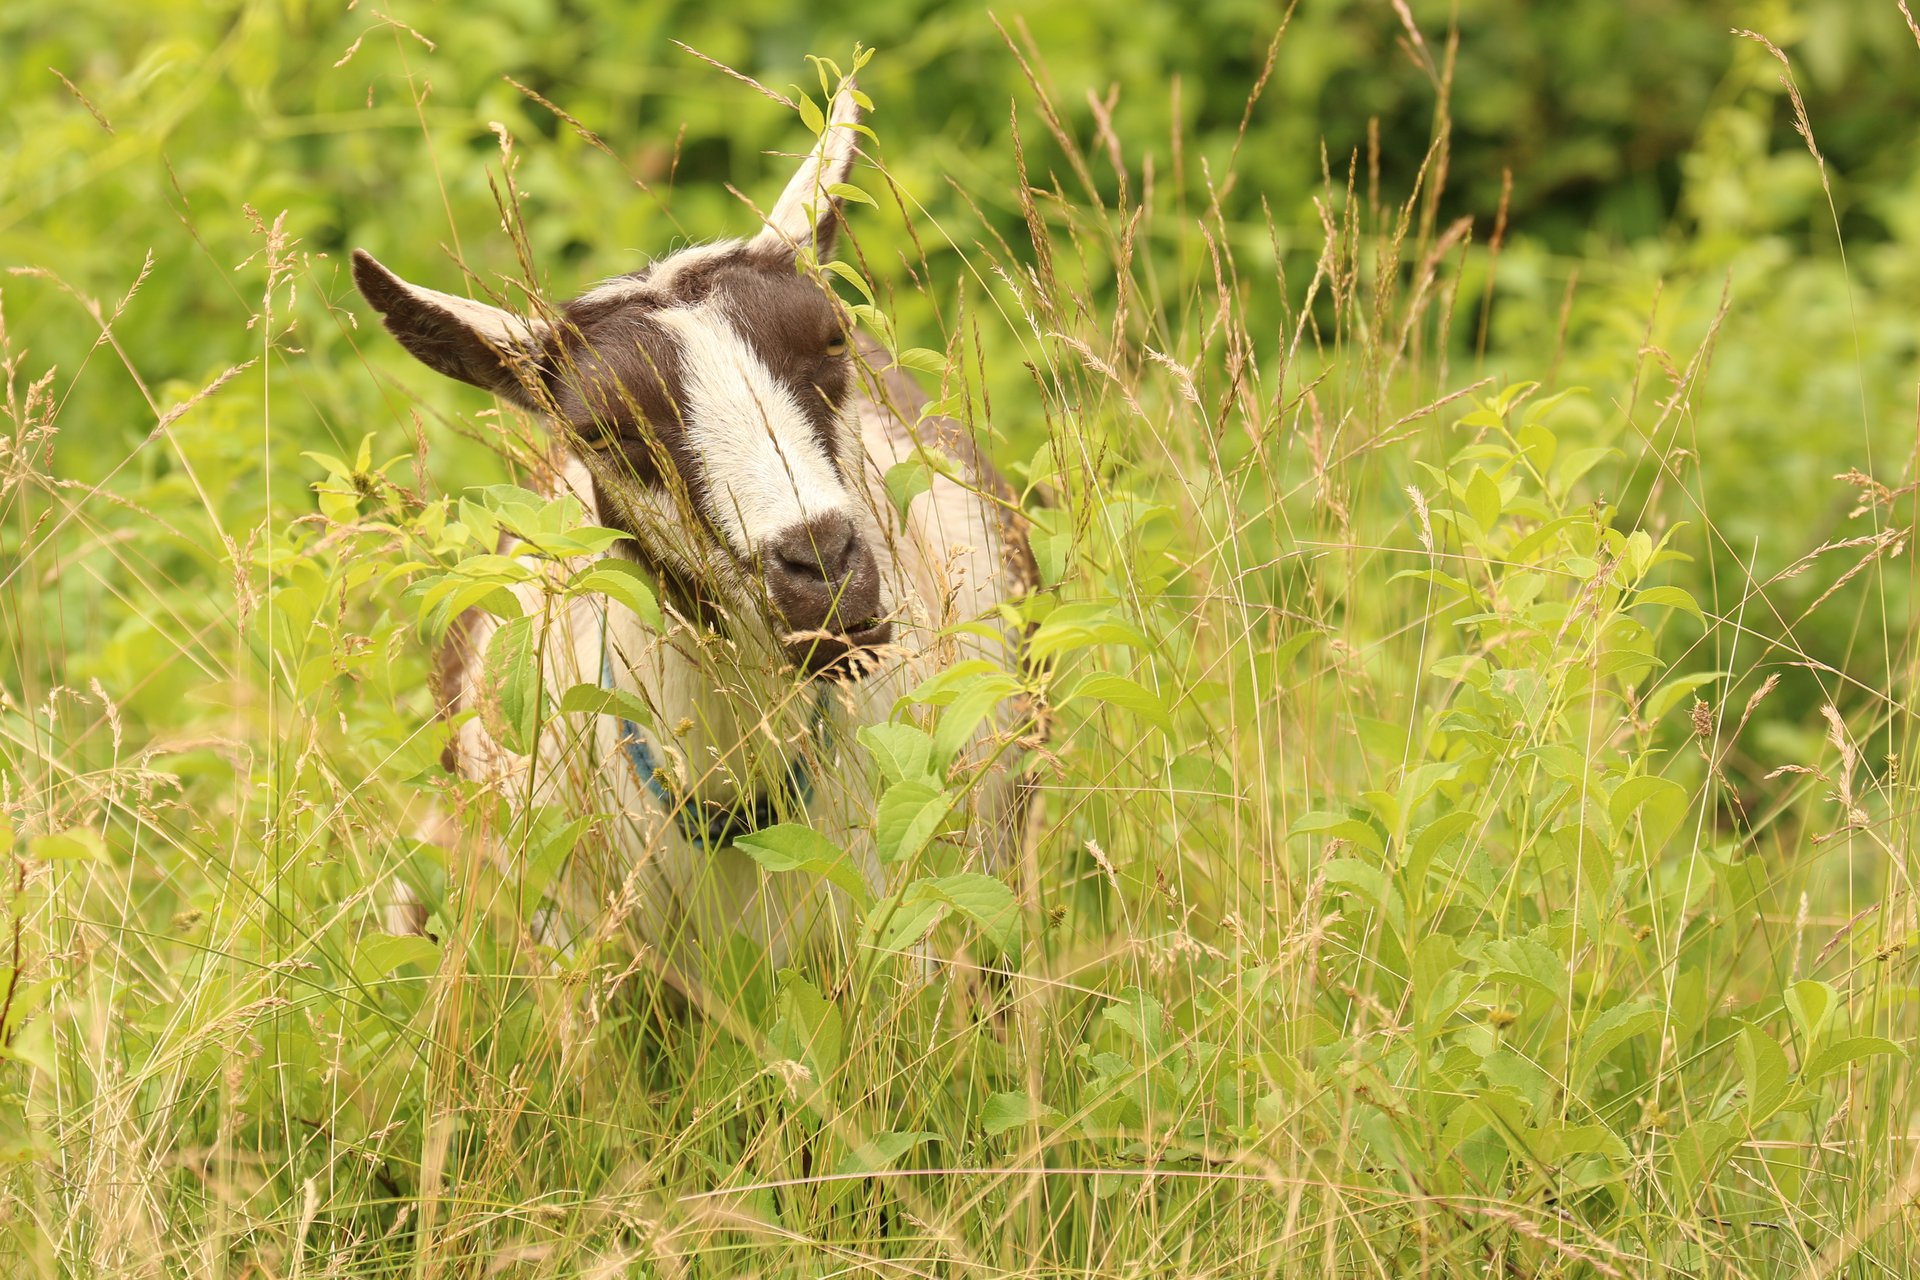 A brown and white goat standing in tall green and brown grass.